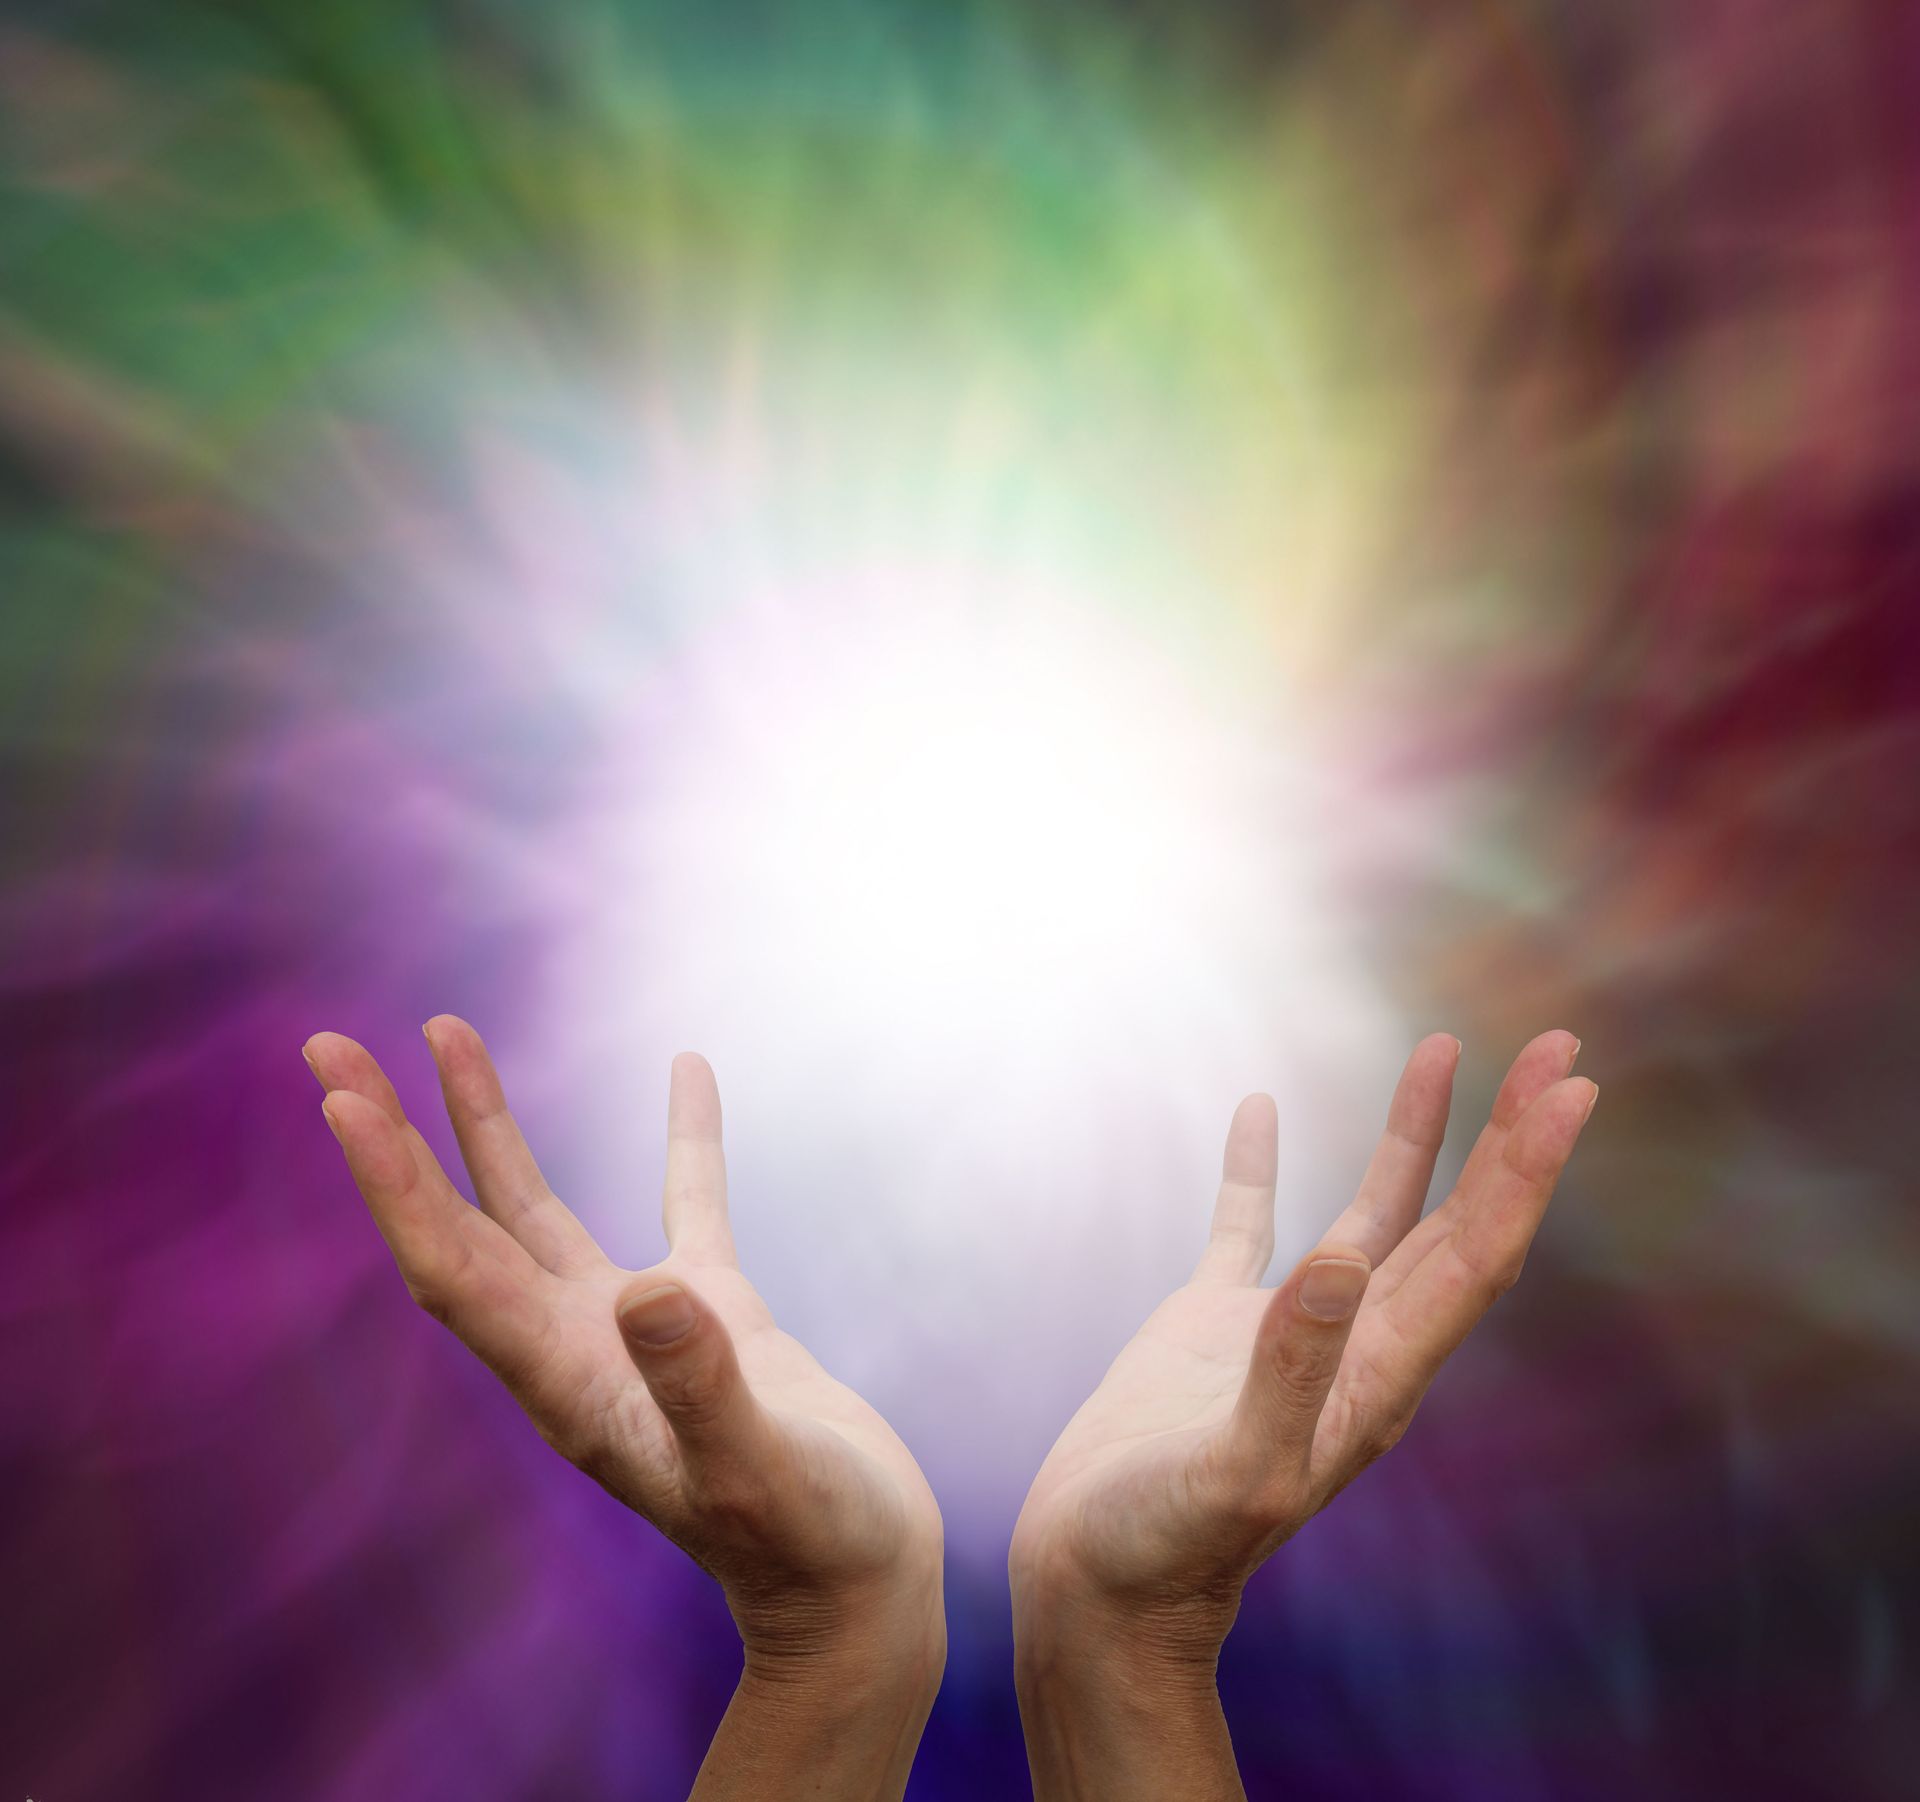 A person is holding a light in their hands